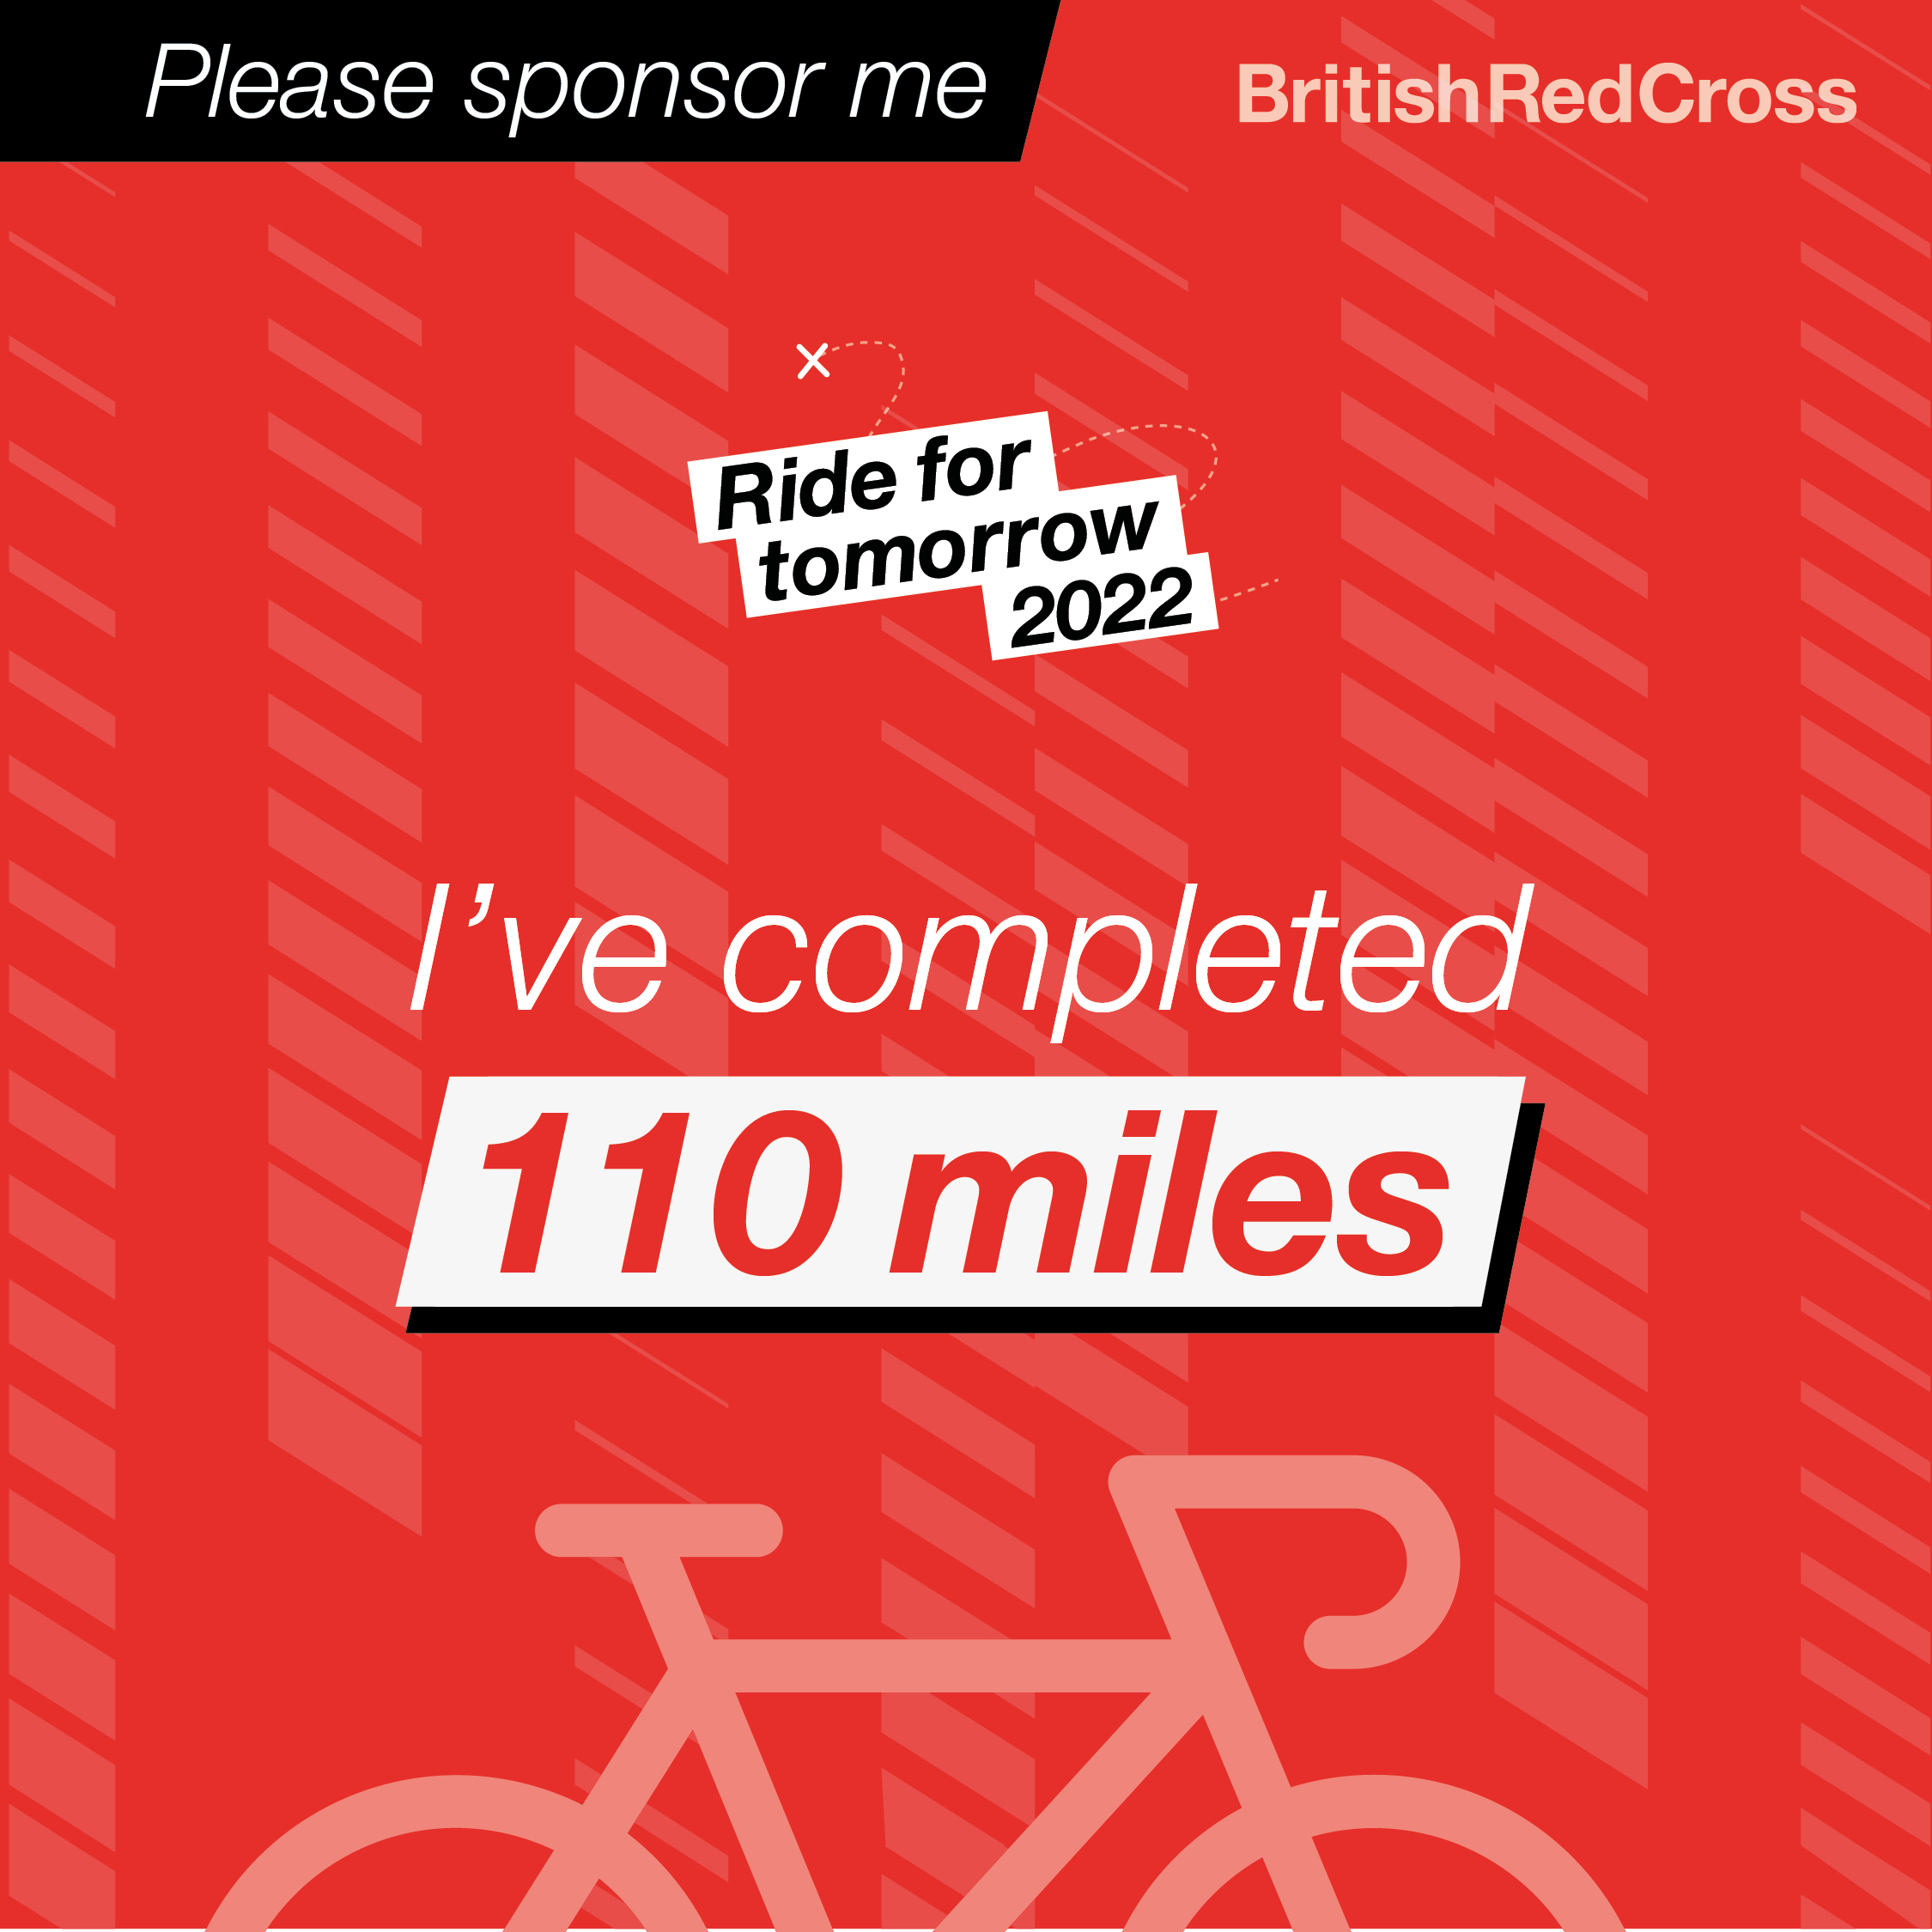 Please sponsor me. I've completed 110 miles. Text shown above a red bike on a red background.